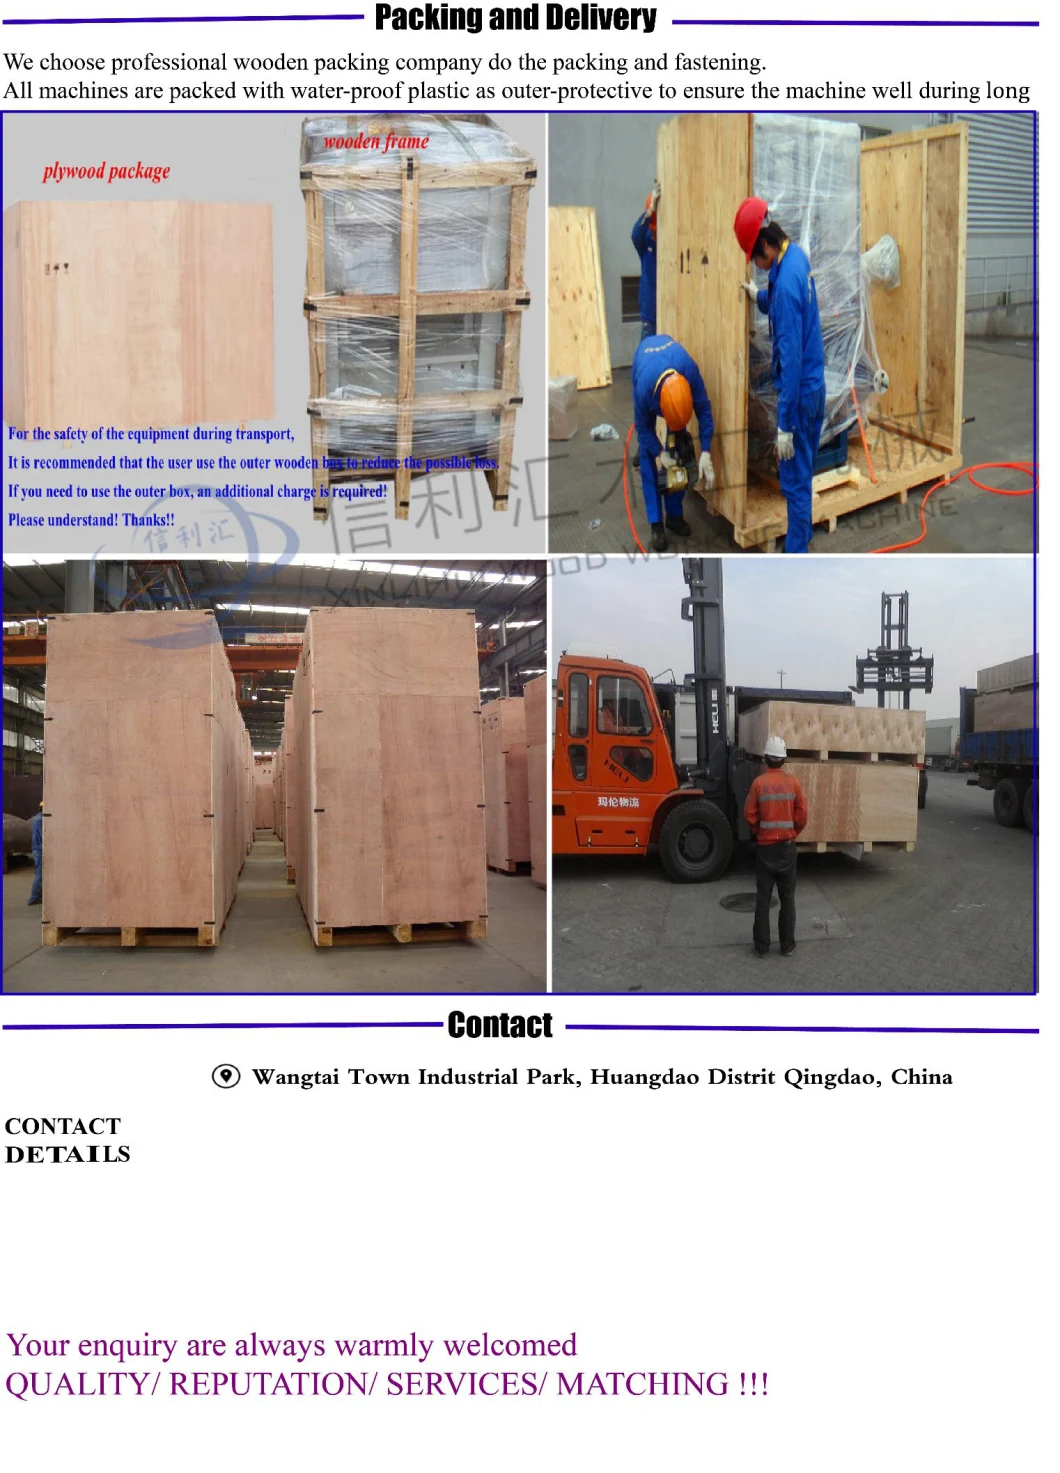 Central Dust Collection System for Timber Work Wood Industrial Central Purification Dust Air Filtration System Dust Collection Dry Grinding System